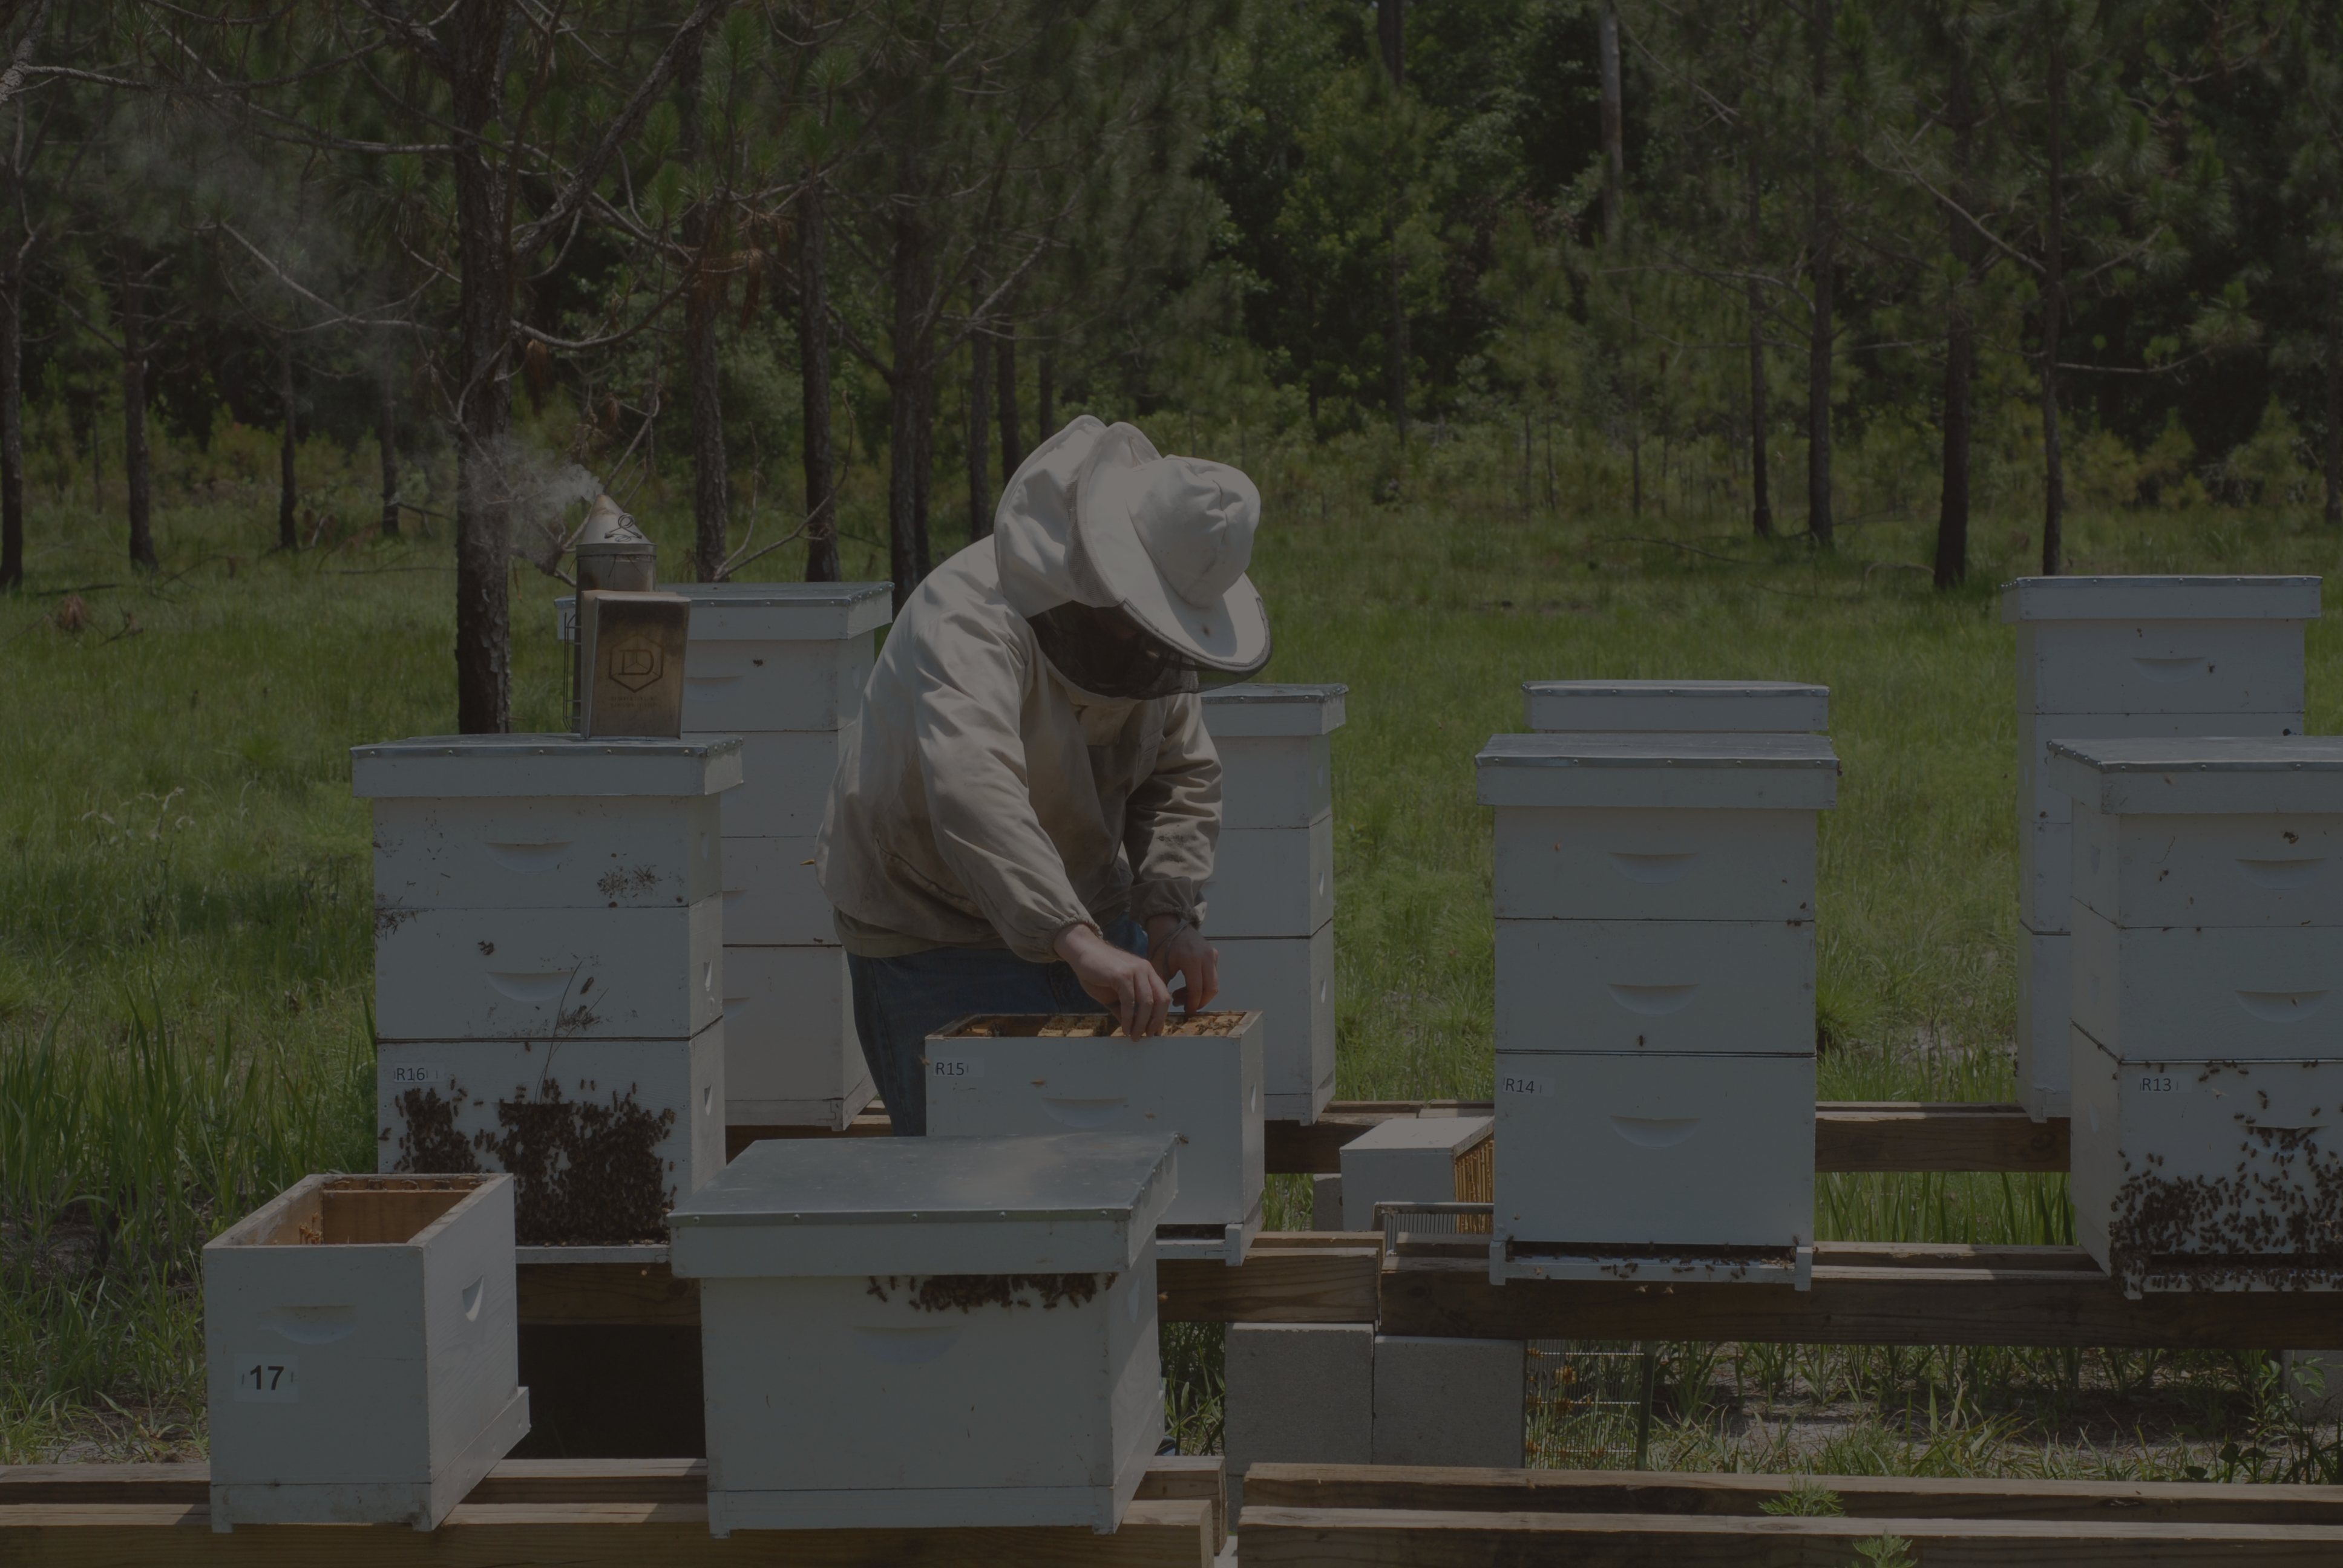 Beekeeper checking hives